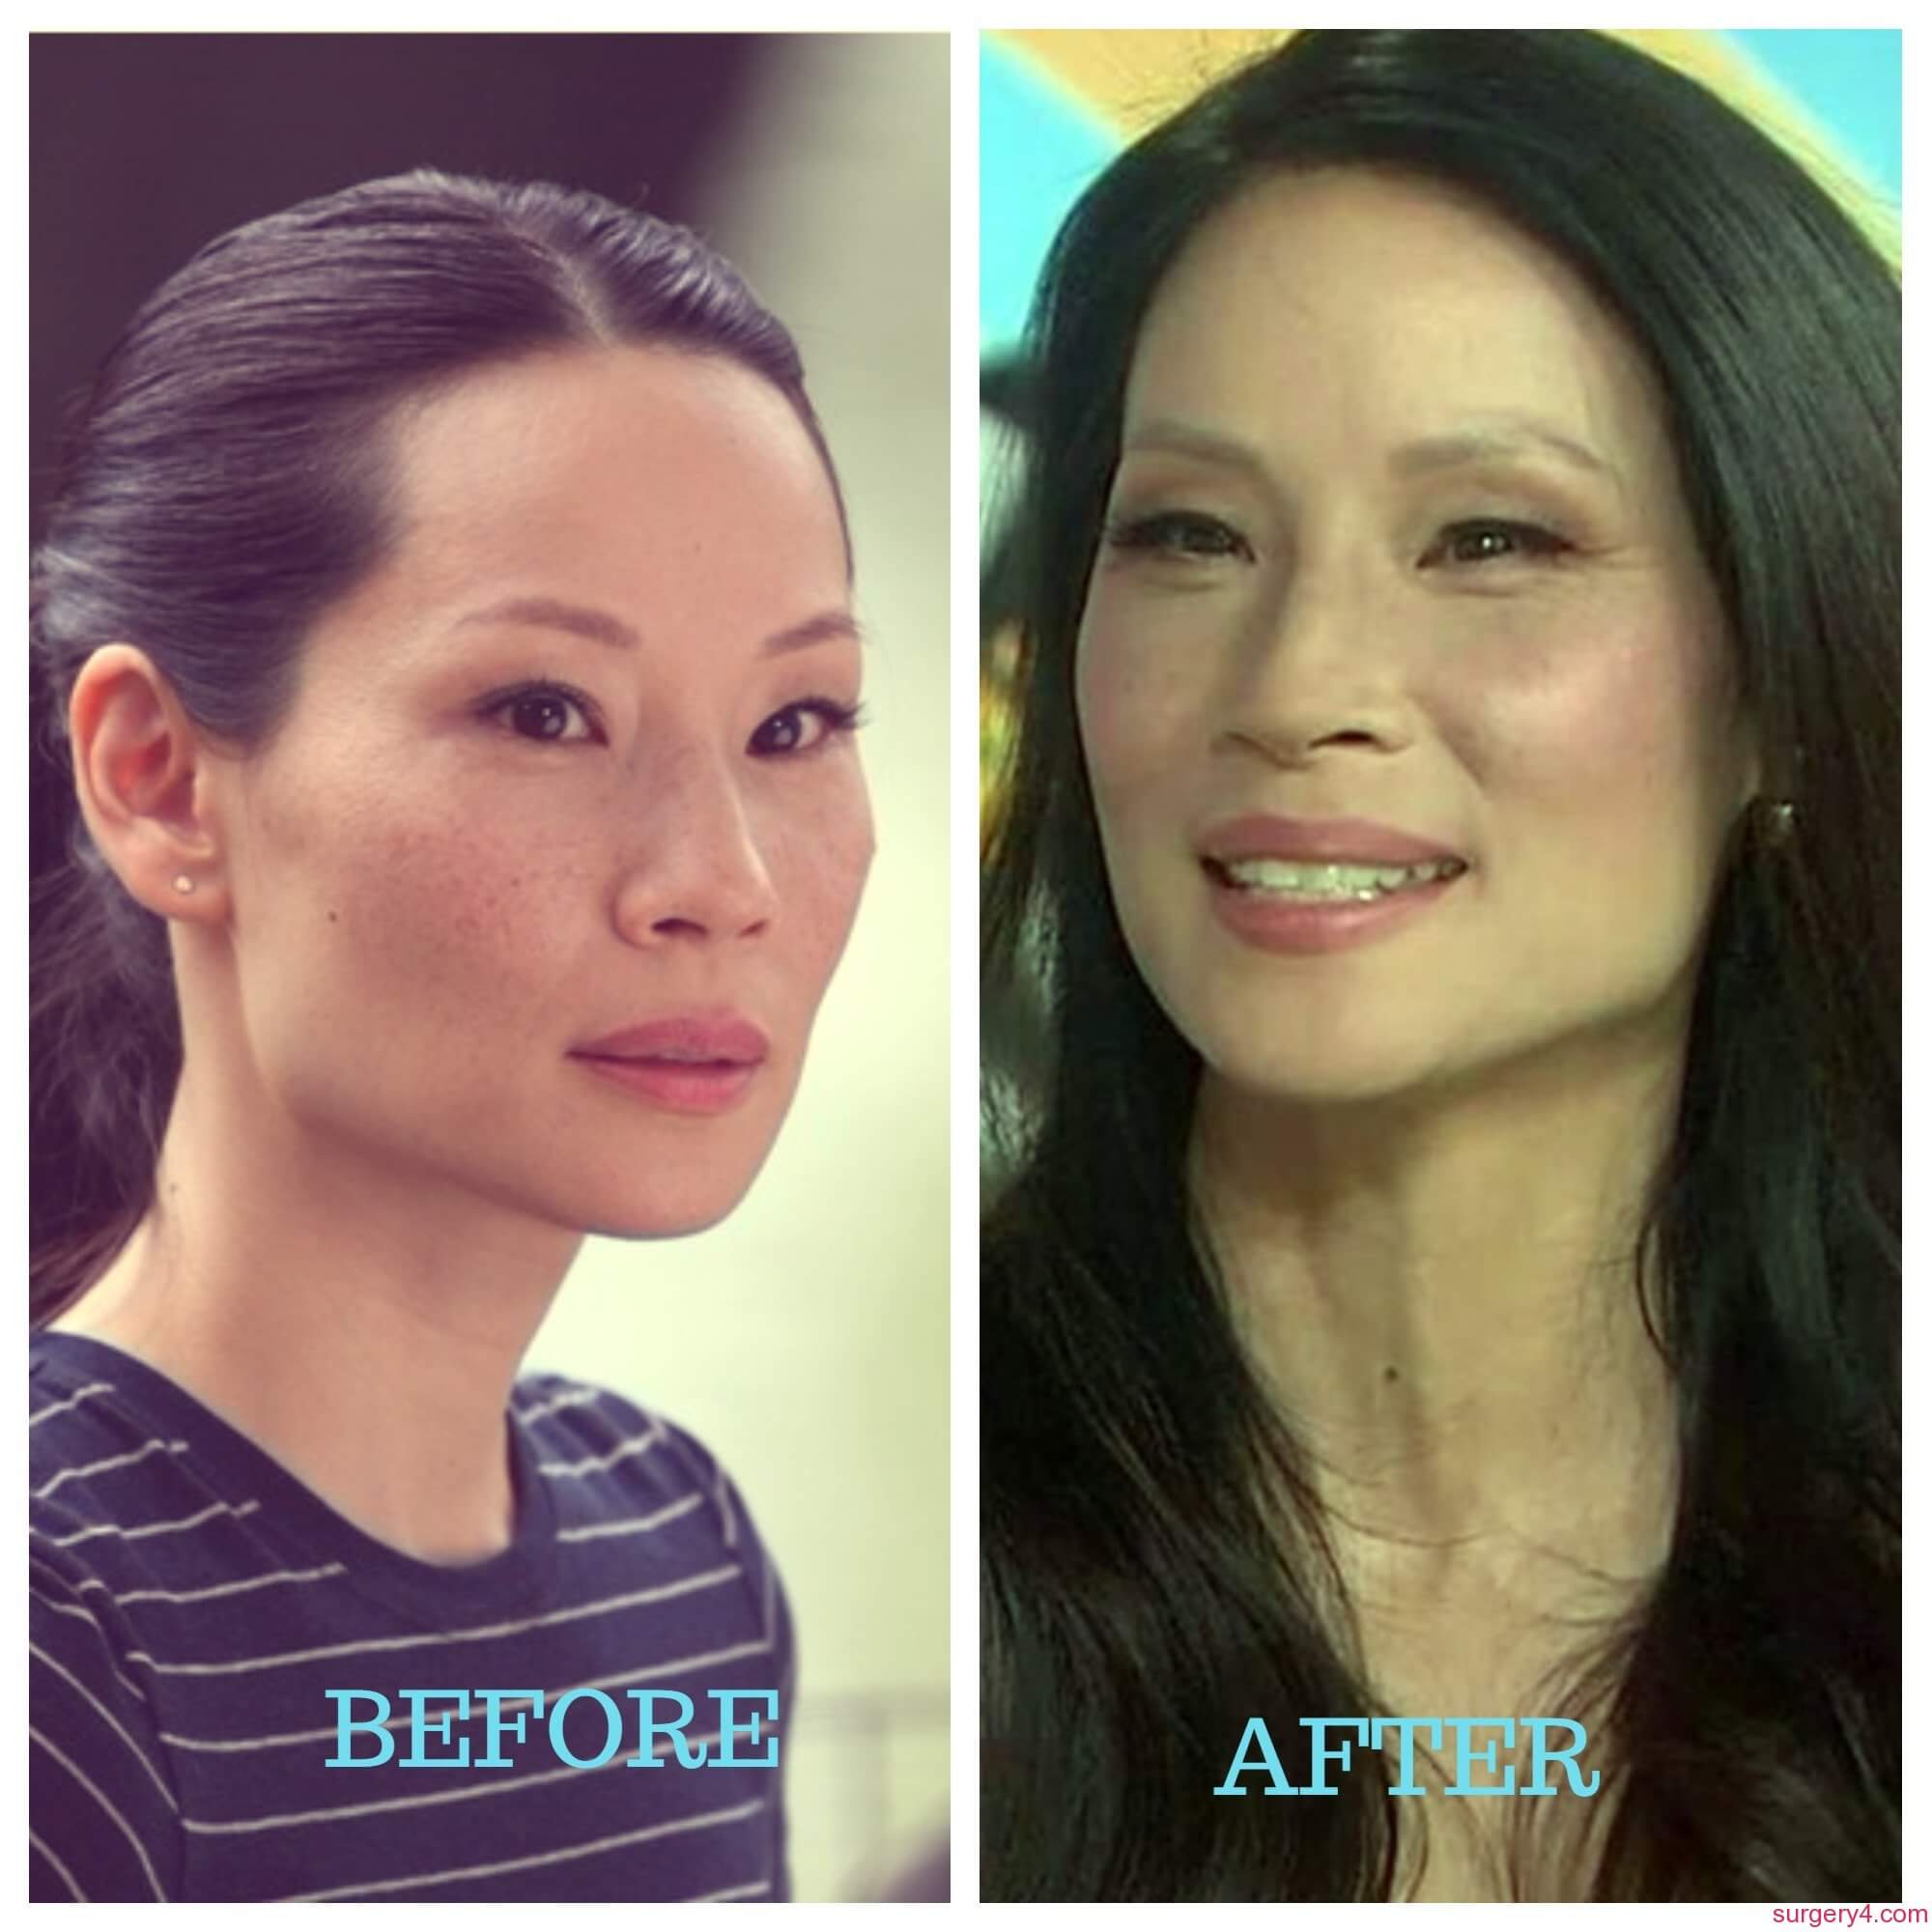 Lucy Liu Plastic Surgery Photos [Before & After] ⋆ Surgery4